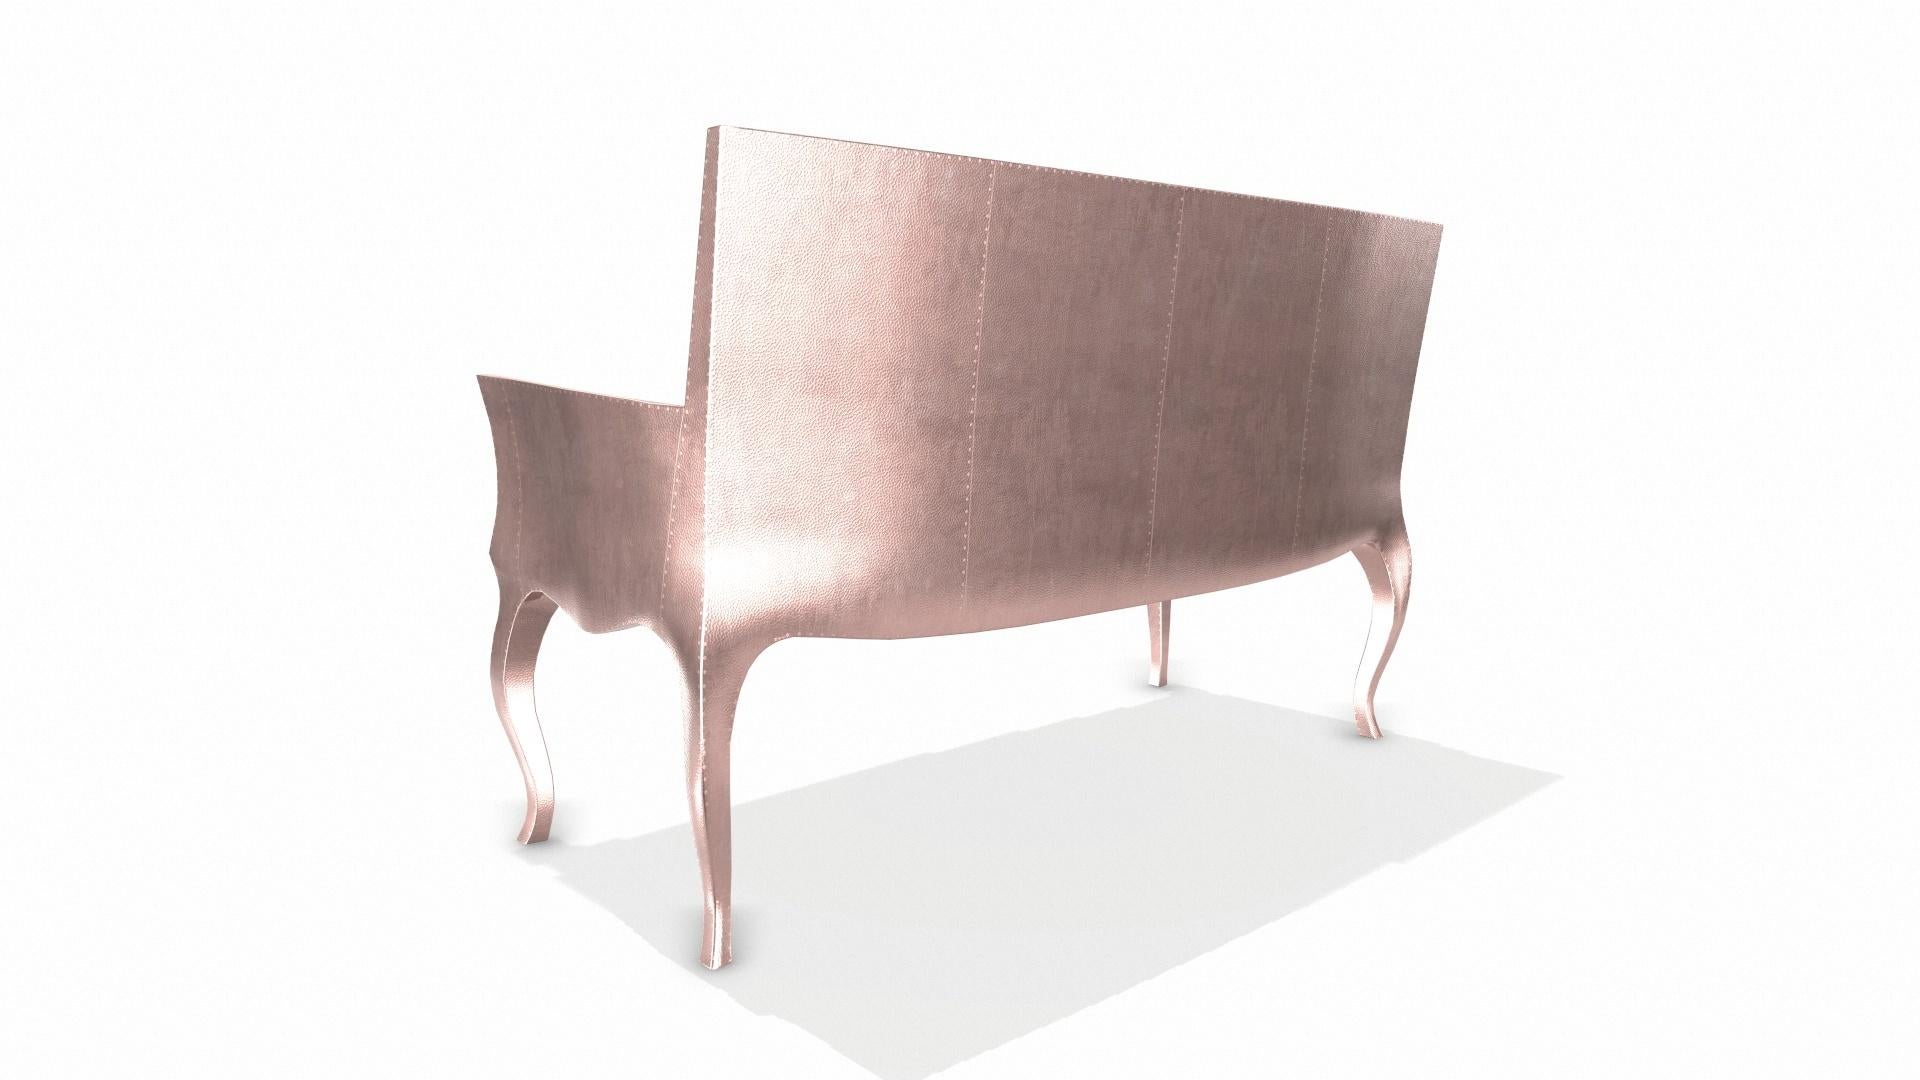 Louise Settee Art Deco Lounge Chairs in Mid. Hammered Copper by Paul Mathieu For Sale 1